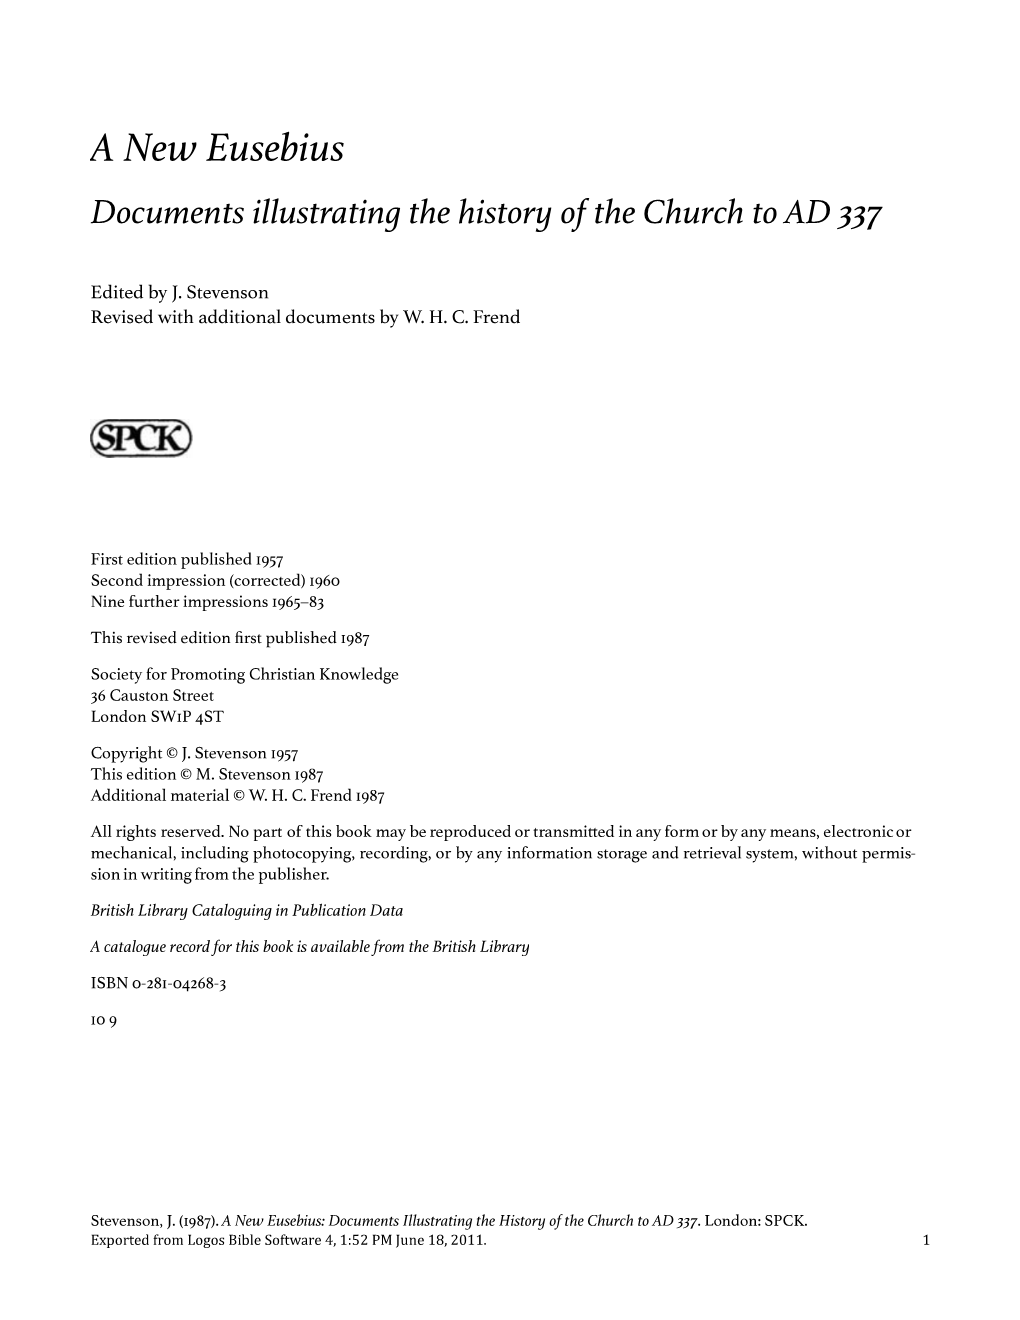 A New Eusebius Documents Illustrating the History of the Church to AD 337